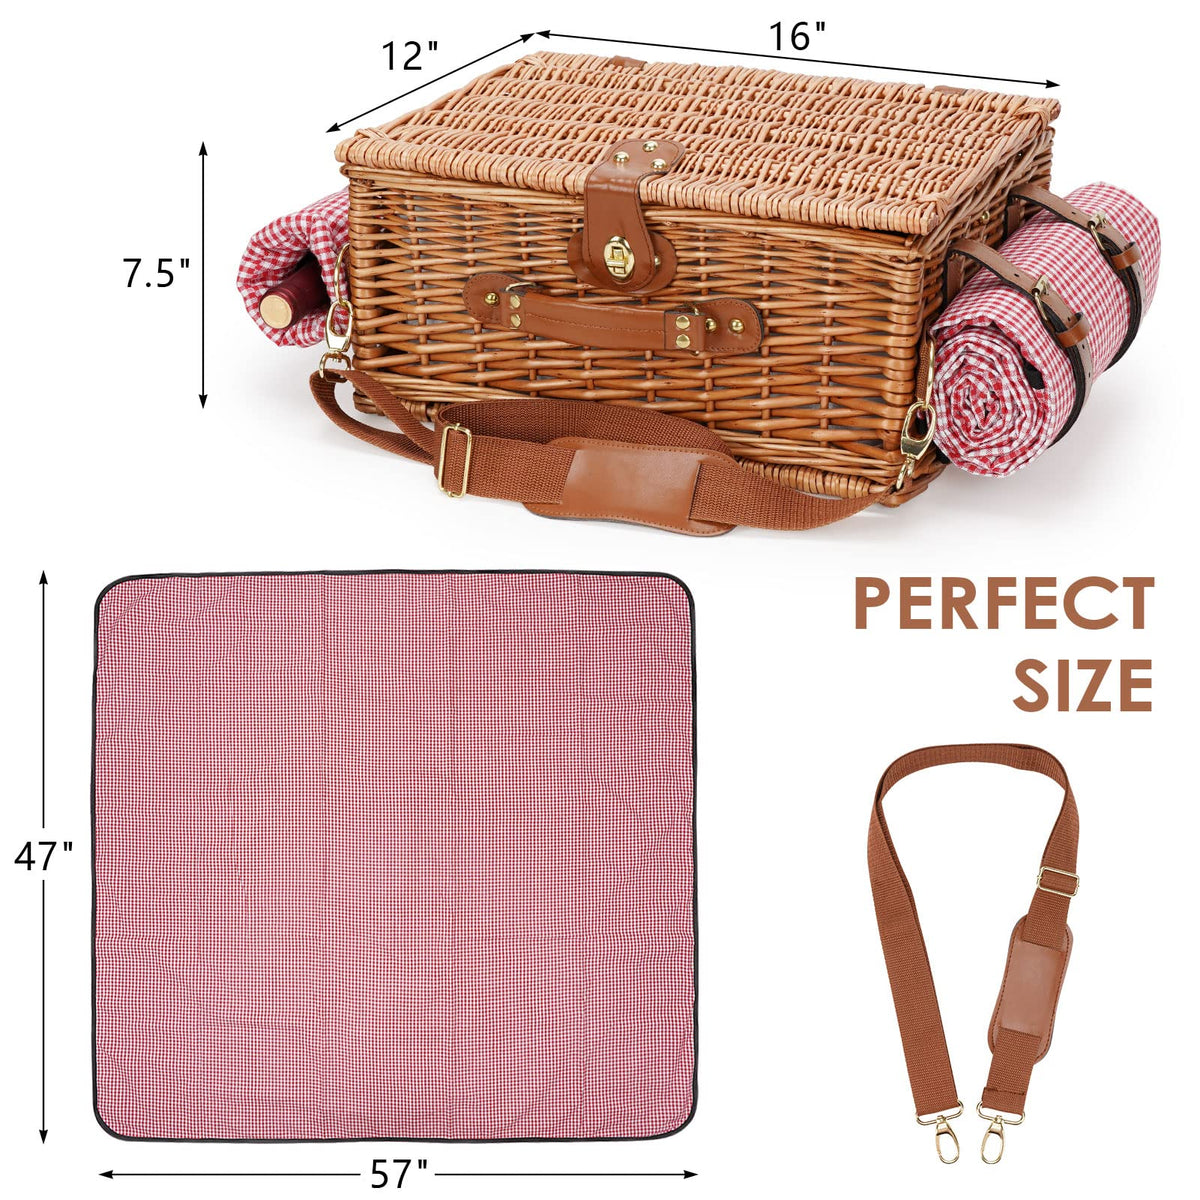 Adorable & Exquisite Picnic Basket for 2 Persons